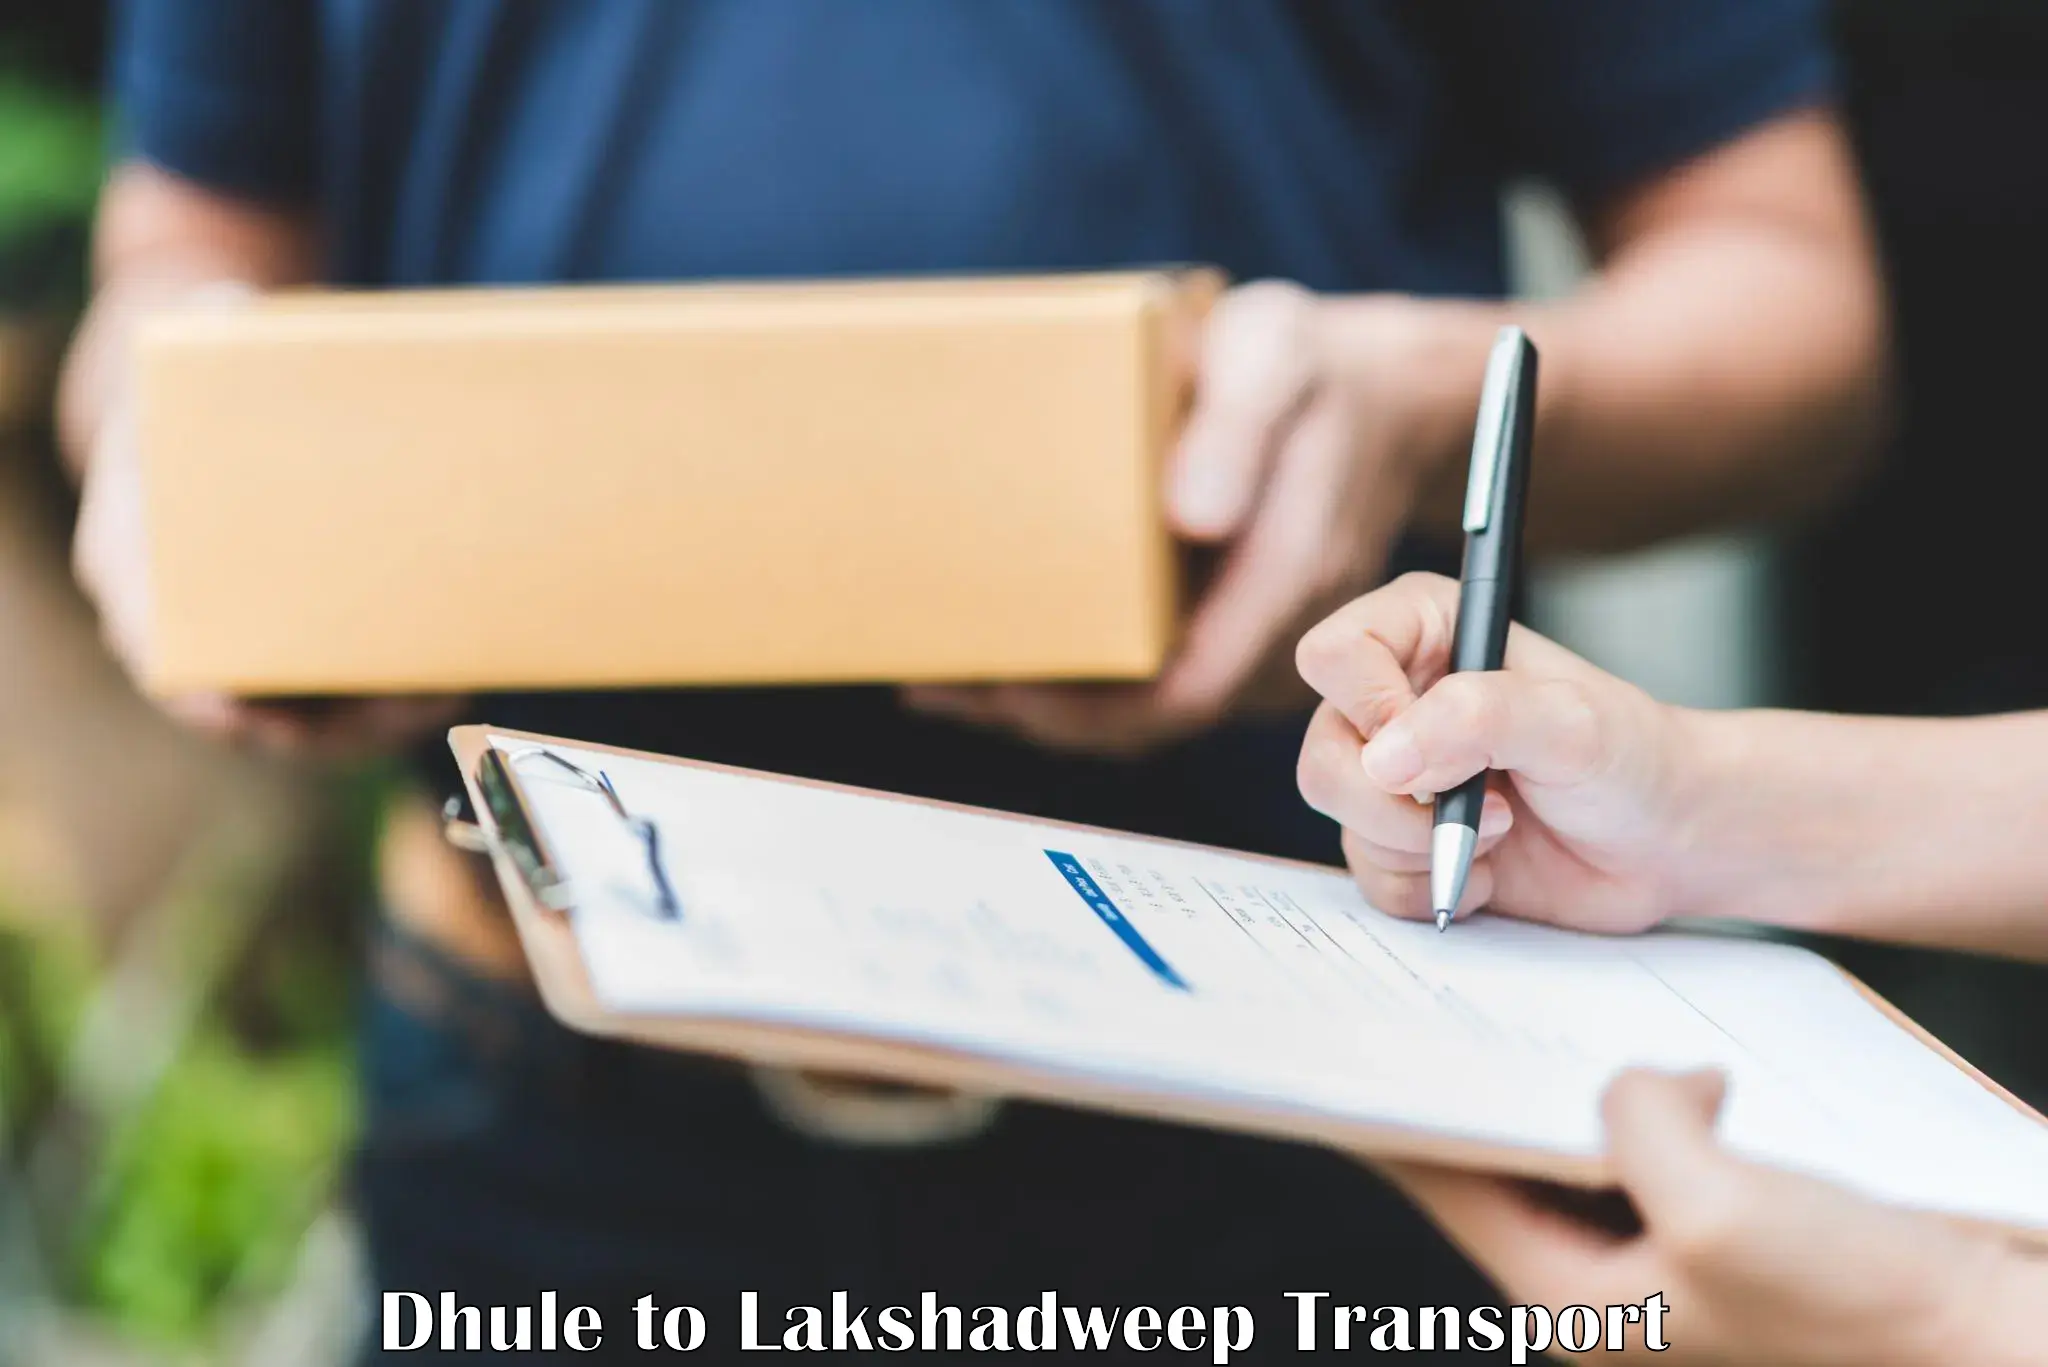 Lorry transport service Dhule to Lakshadweep